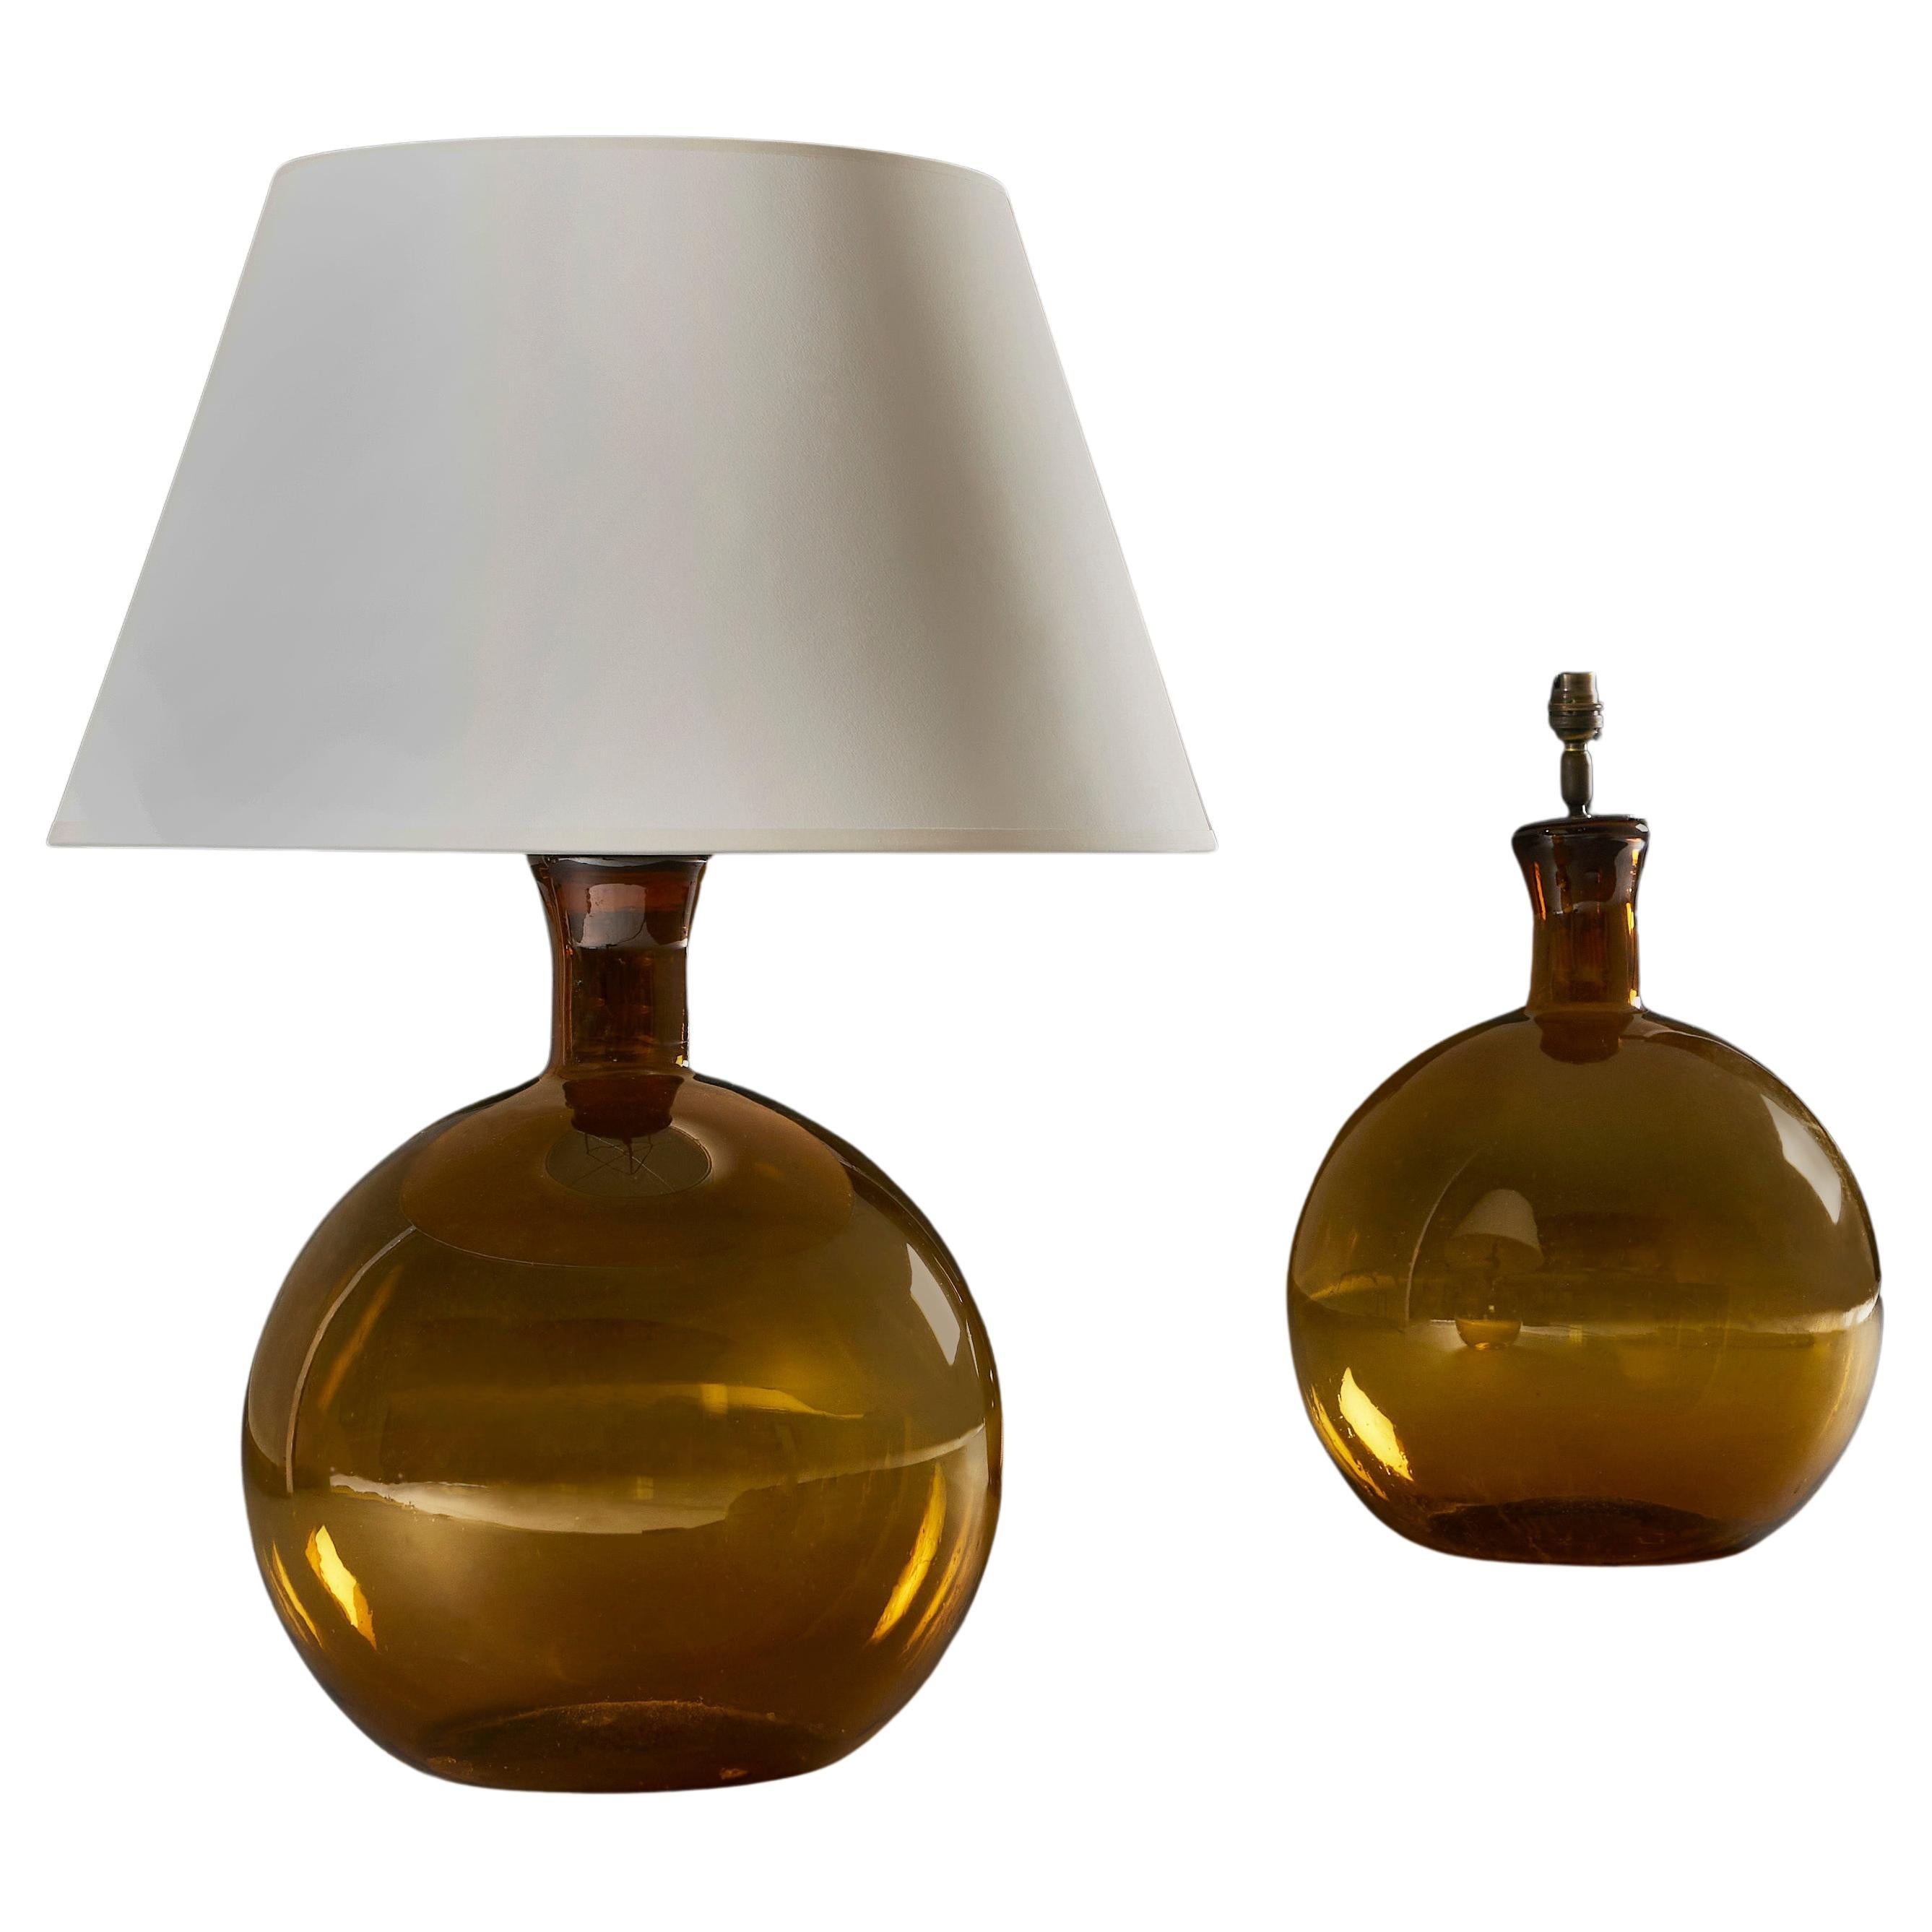 A Pair of French Amber Glass Vessels as Table Lamps